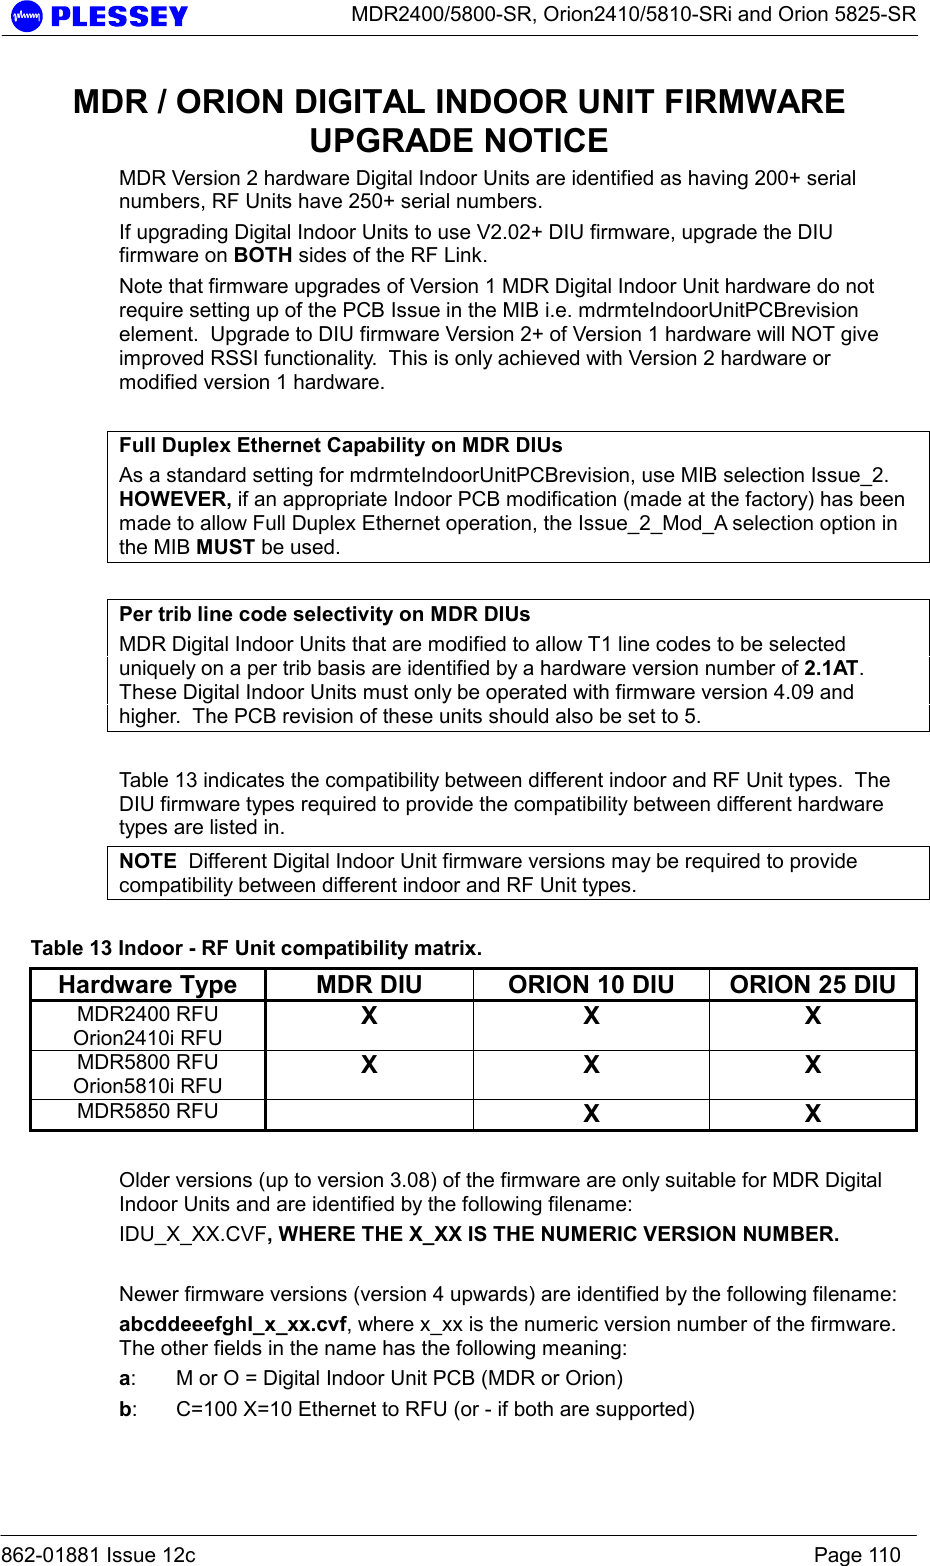      MDR2400/5800-SR, Orion2410/5810-SRi and Orion 5825-SR  862-01881 Issue 12c    Page 110 MDR / ORION DIGITAL INDOOR UNIT FIRMWARE UPGRADE NOTICE MDR Version 2 hardware Digital Indoor Units are identified as having 200+ serial numbers, RF Units have 250+ serial numbers. If upgrading Digital Indoor Units to use V2.02+ DIU firmware, upgrade the DIU firmware on BOTH sides of the RF Link. Note that firmware upgrades of Version 1 MDR Digital Indoor Unit hardware do not require setting up of the PCB Issue in the MIB i.e. mdrmteIndoorUnitPCBrevision element.  Upgrade to DIU firmware Version 2+ of Version 1 hardware will NOT give improved RSSI functionality.  This is only achieved with Version 2 hardware or modified version 1 hardware.  Full Duplex Ethernet Capability on MDR DIUs As a standard setting for mdrmteIndoorUnitPCBrevision, use MIB selection Issue_2.  HOWEVER, if an appropriate Indoor PCB modification (made at the factory) has been made to allow Full Duplex Ethernet operation, the Issue_2_Mod_A selection option in the MIB MUST be used.  Per trib line code selectivity on MDR DIUs MDR Digital Indoor Units that are modified to allow T1 line codes to be selected uniquely on a per trib basis are identified by a hardware version number of 2.1AT.  These Digital Indoor Units must only be operated with firmware version 4.09 and higher.  The PCB revision of these units should also be set to 5.  Table 13 indicates the compatibility between different indoor and RF Unit types.  The DIU firmware types required to provide the compatibility between different hardware types are listed in. NOTE  Different Digital Indoor Unit firmware versions may be required to provide compatibility between different indoor and RF Unit types.  Table 13 Indoor - RF Unit compatibility matrix. Hardware Type  MDR DIU  ORION 10 DIU  ORION 25 DIU MDR2400 RFU Orion2410i RFU  X X X MDR5800 RFU Orion5810i RFU  X X X MDR5850 RFU   X X  Older versions (up to version 3.08) of the firmware are only suitable for MDR Digital Indoor Units and are identified by the following filename: IDU_X_XX.CVF, WHERE THE X_XX IS THE NUMERIC VERSION NUMBER.  Newer firmware versions (version 4 upwards) are identified by the following filename: abcddeeefghI_x_xx.cvf, where x_xx is the numeric version number of the firmware.  The other fields in the name has the following meaning: a:  M or O = Digital Indoor Unit PCB (MDR or Orion) b:  C=100 X=10 Ethernet to RFU (or - if both are supported) 